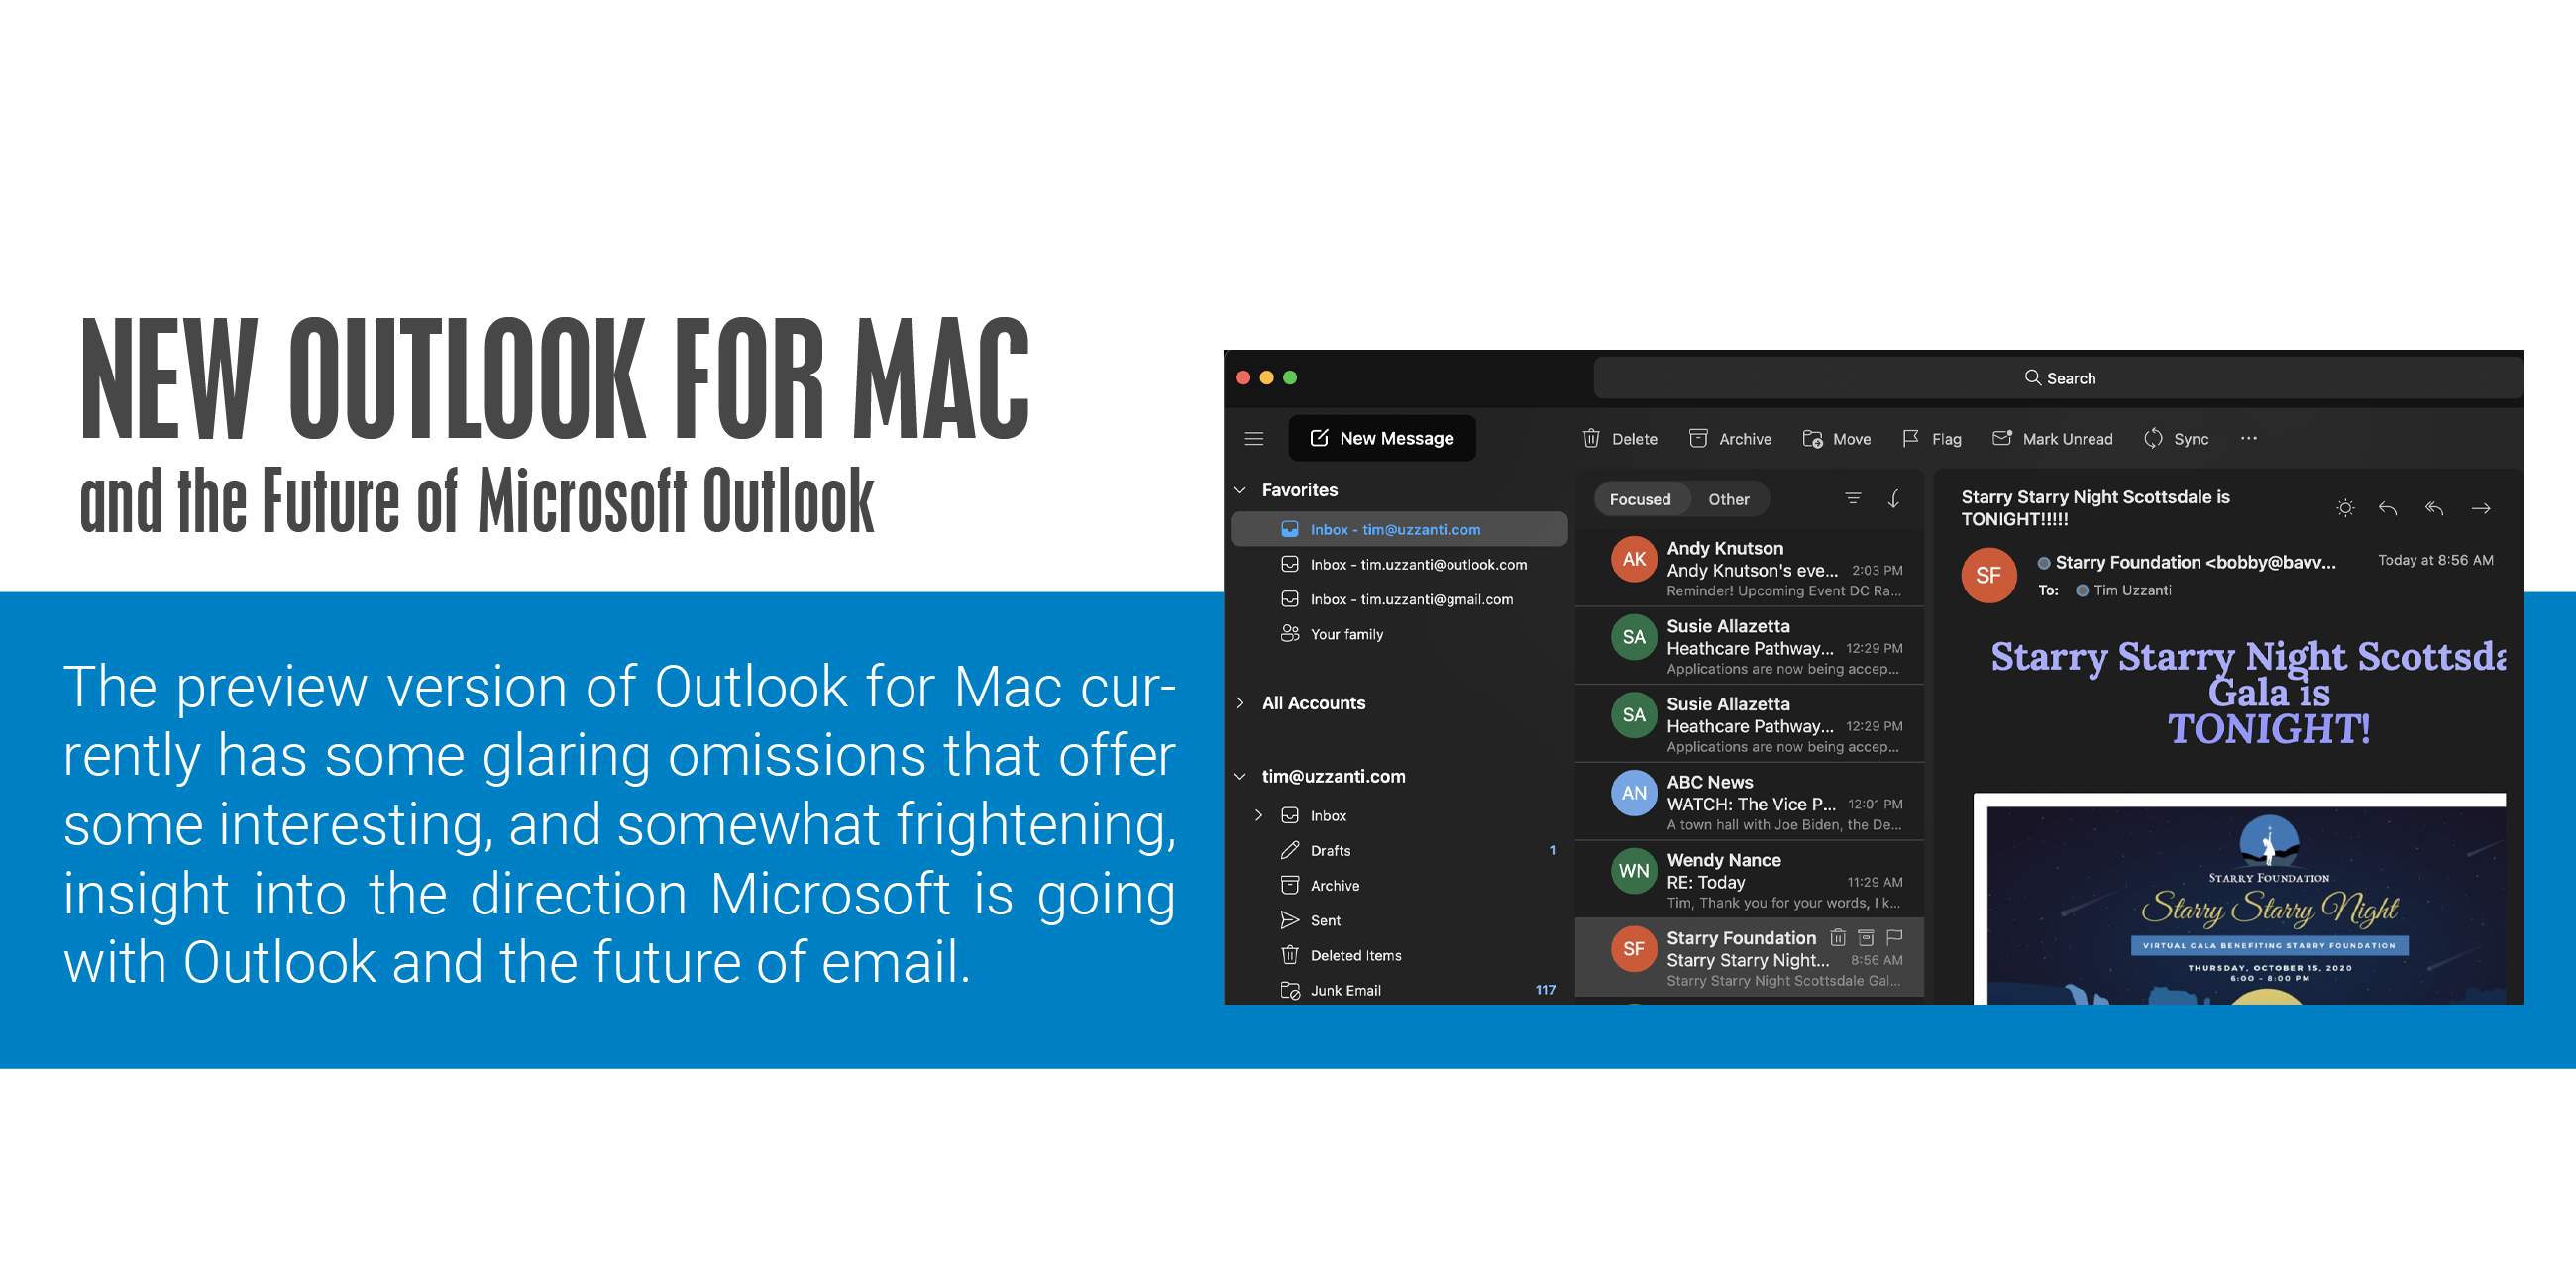 can i purchase just microsoft outlook only for a mac